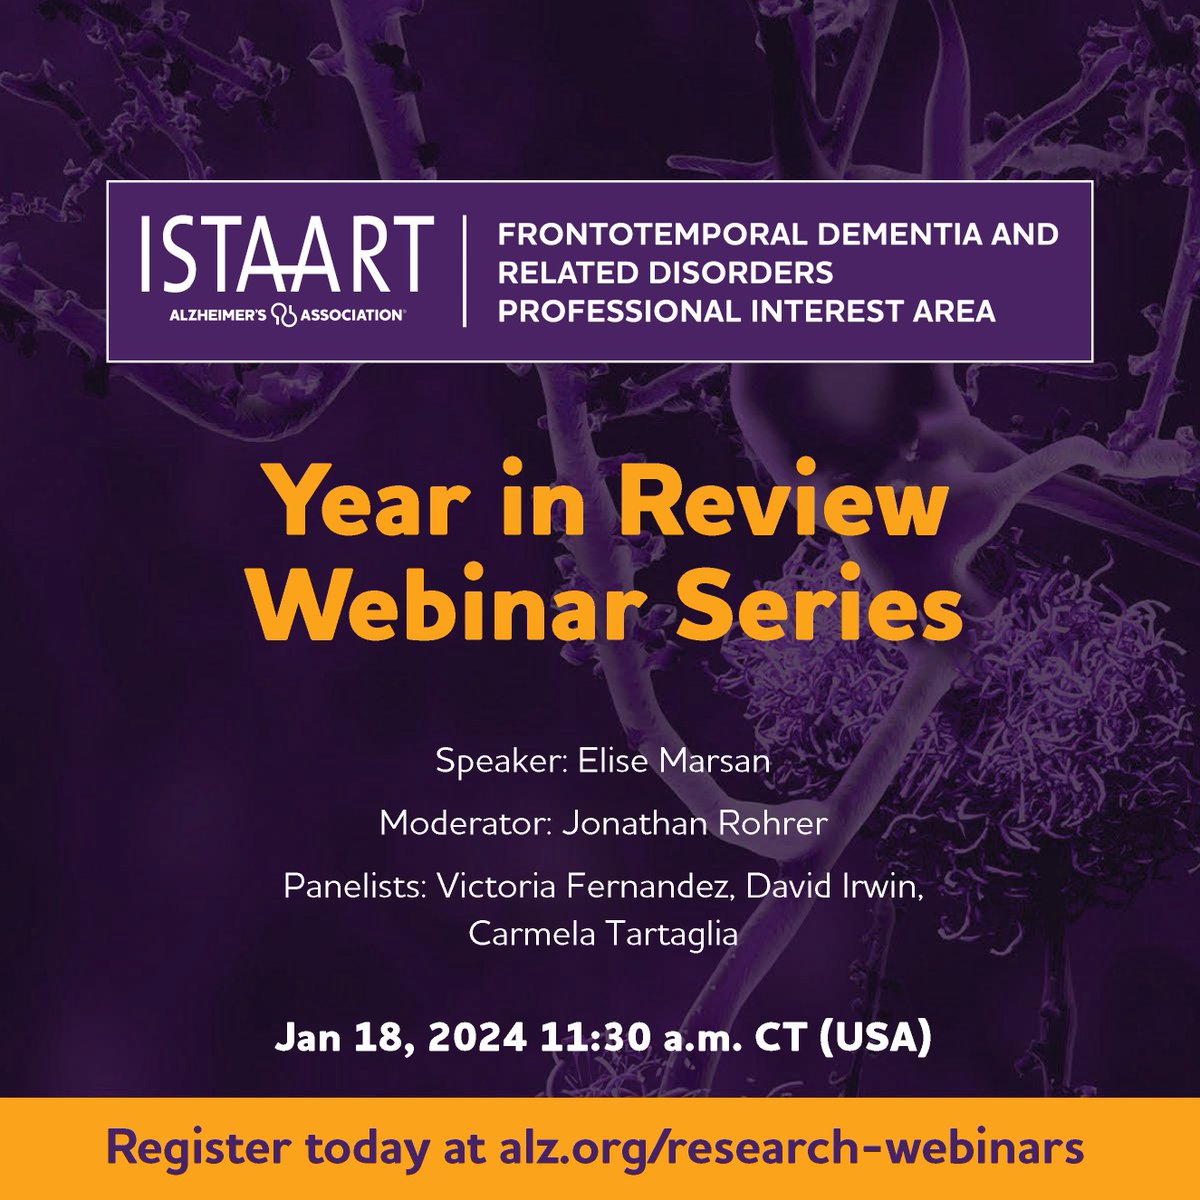 The best way to start the 2024 is to join our Year in Review webinar. @EliseMarsan will highlight notable publications in the field of FTD in 2023. Then @jonrohrer, @MC_Tartaglia, Victoria Fernandez and David Irwin will discuss future research. Join us via the link below: